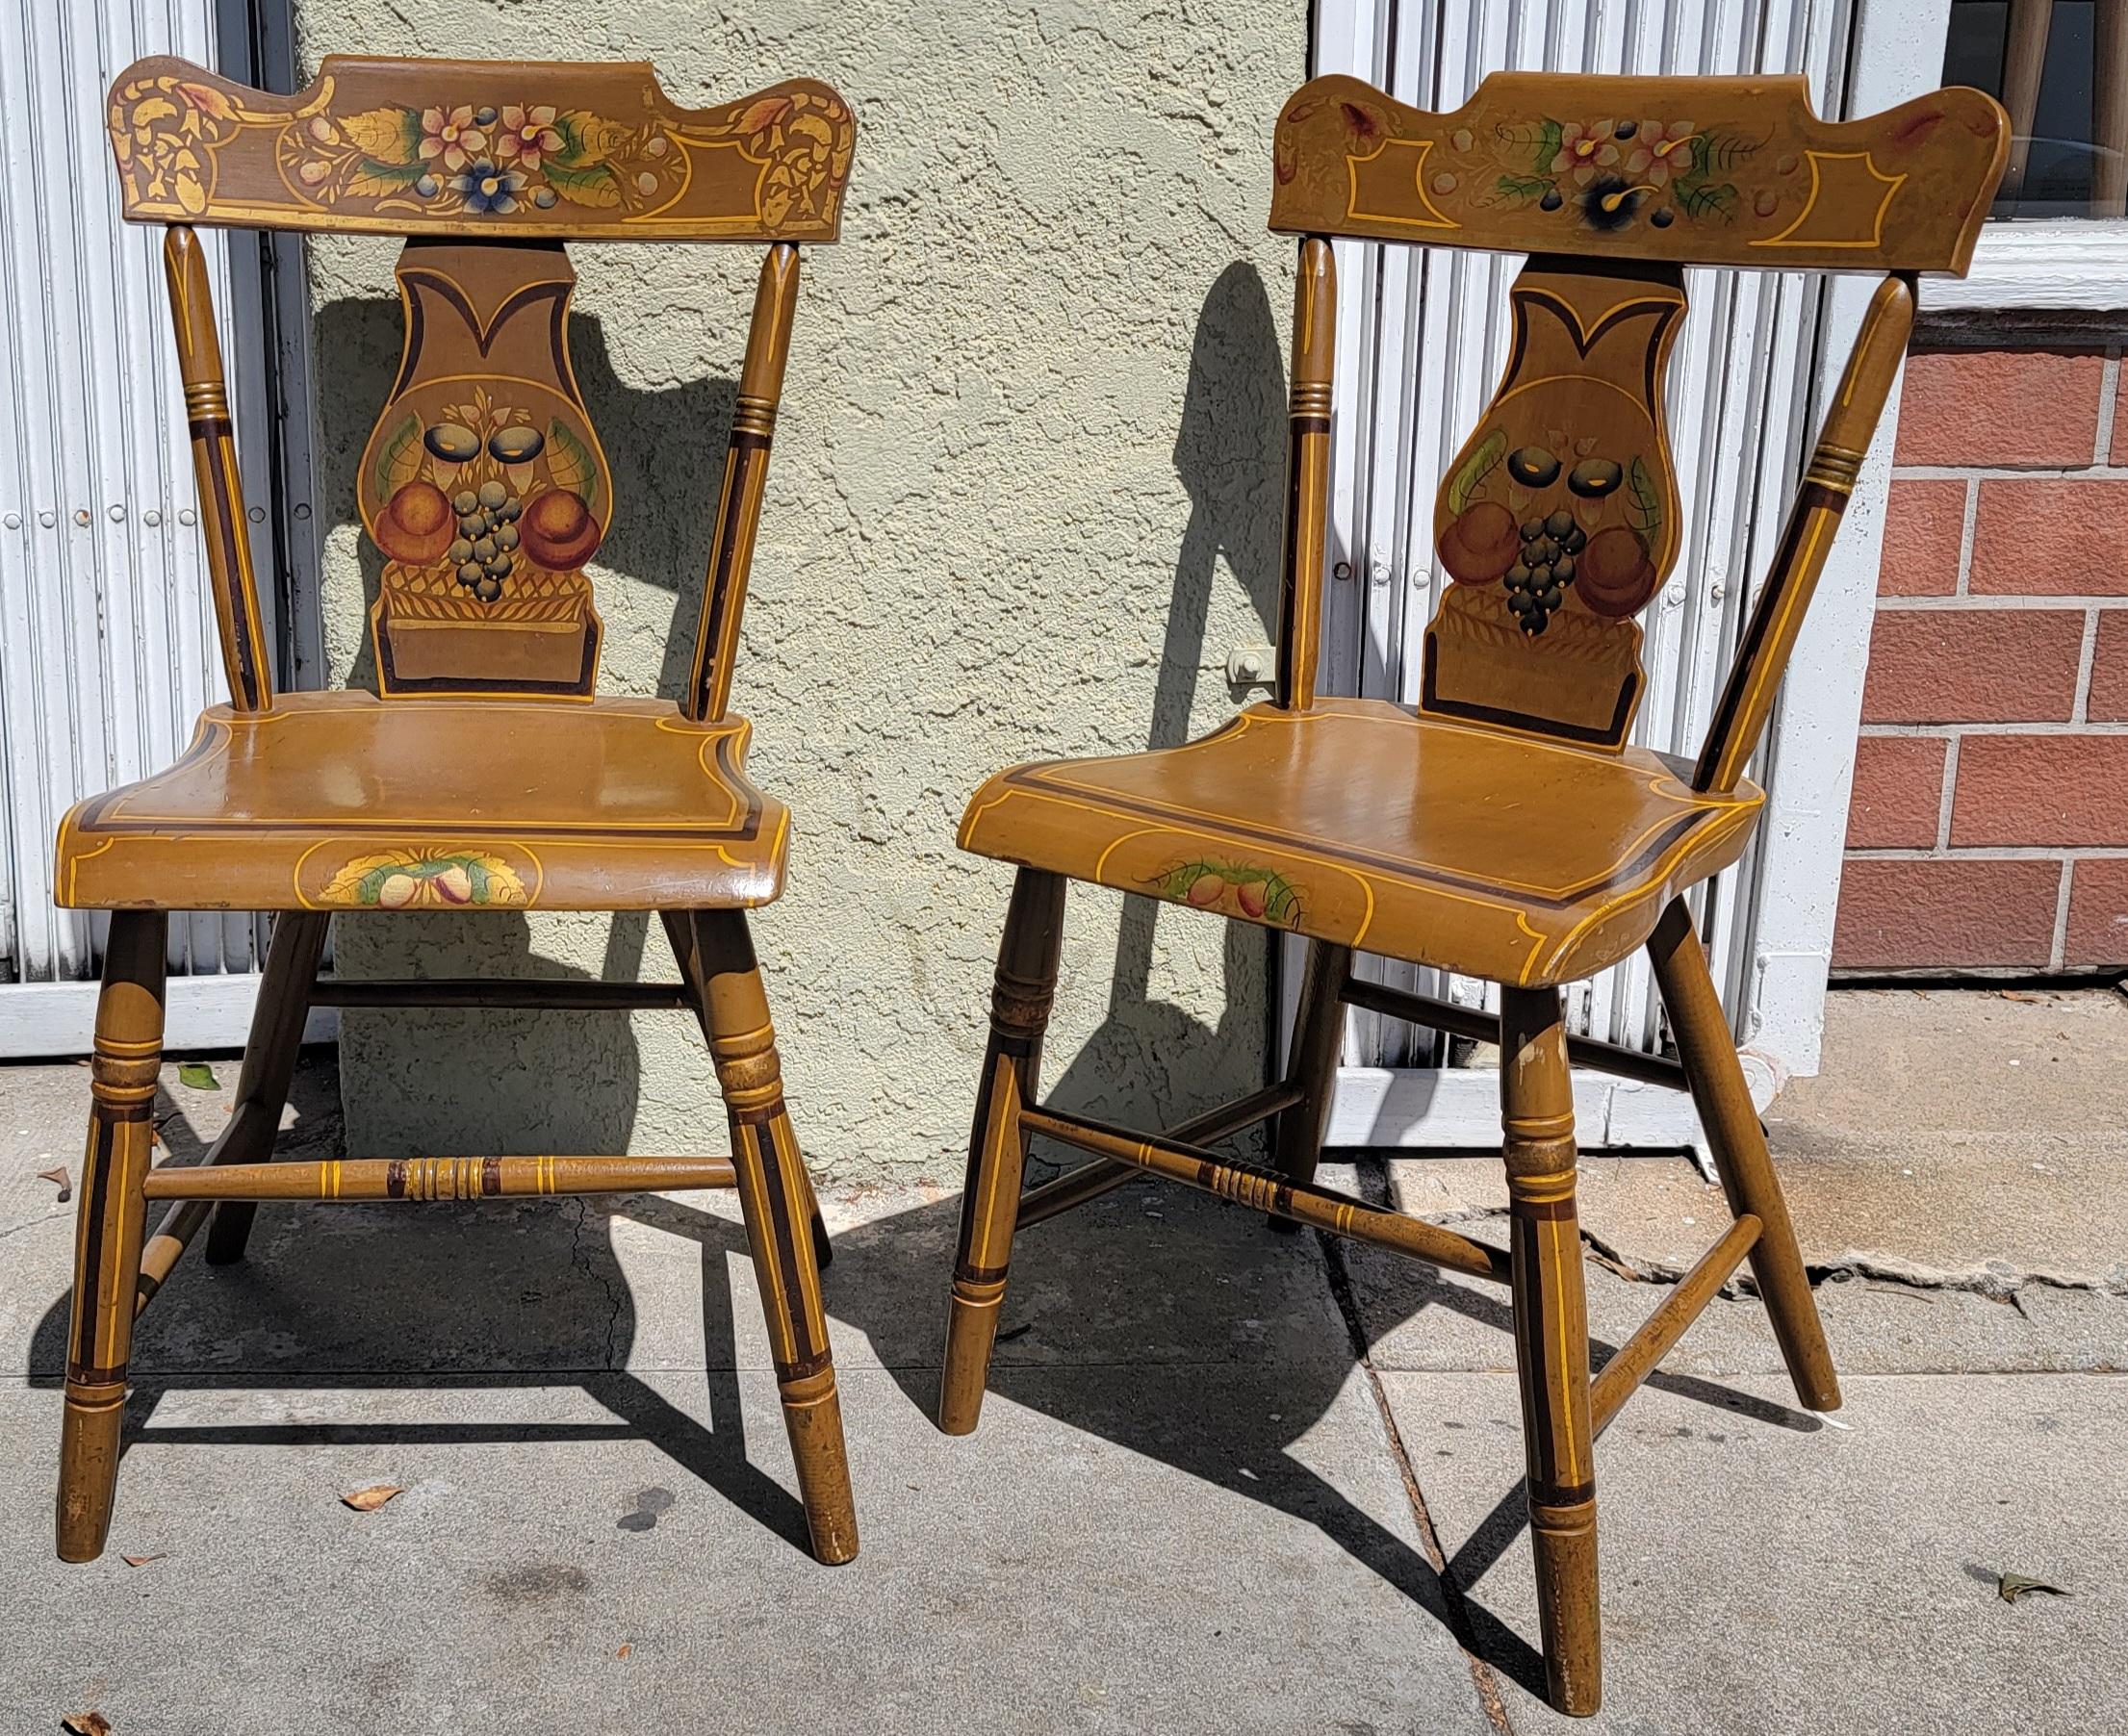 American 19th C Original Painted Decorated Chairs, Lancaster County PA